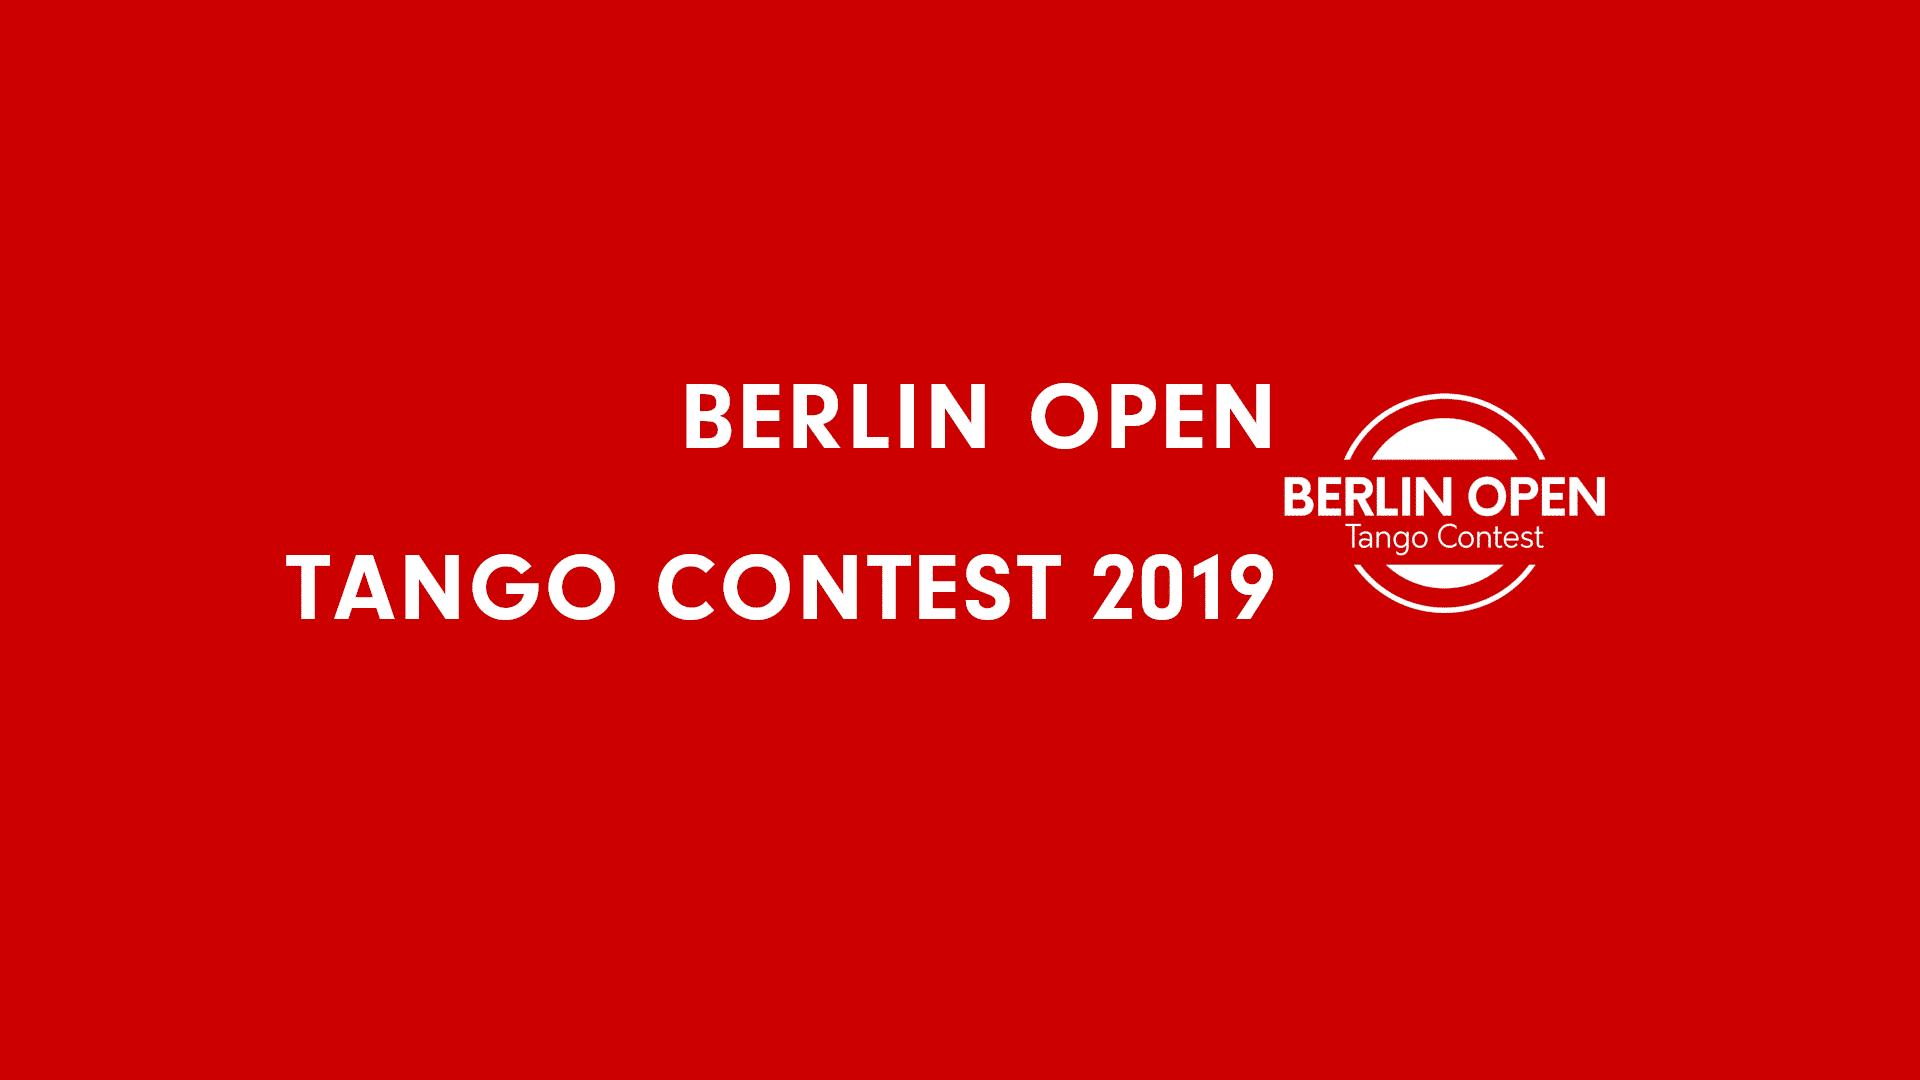 Berlin Open Tango Contest 2019 preview picture